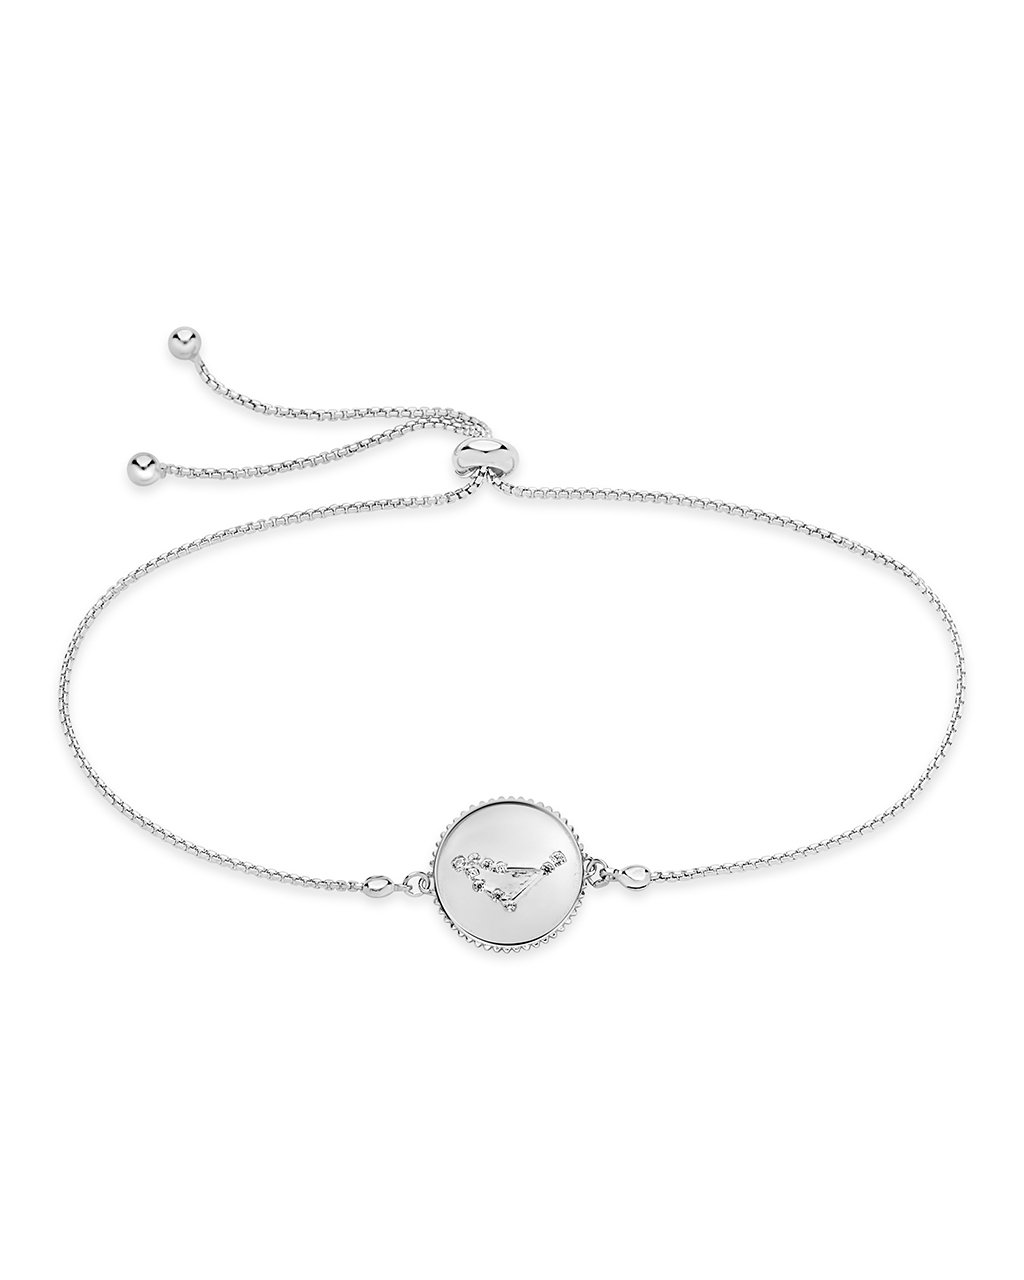 Sterling Silver Constellation Disk Bolo Bracelet Bracelet Sterling Forever Silver Capricorn (Dec 22 - Jan 19) 